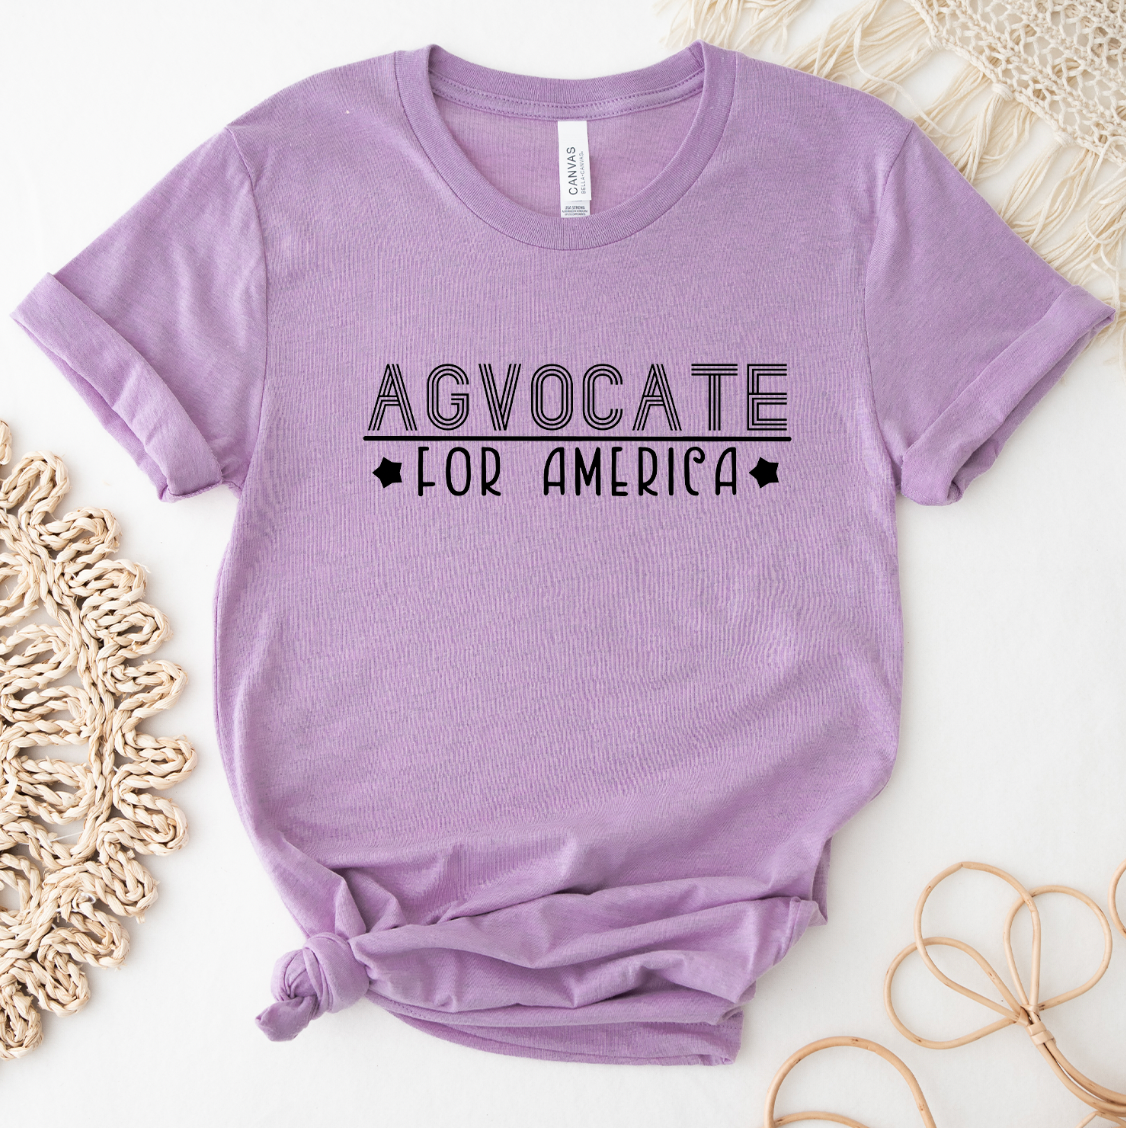 Agvocate For America T-Shirt (XS-4XL) - Multiple Colors!